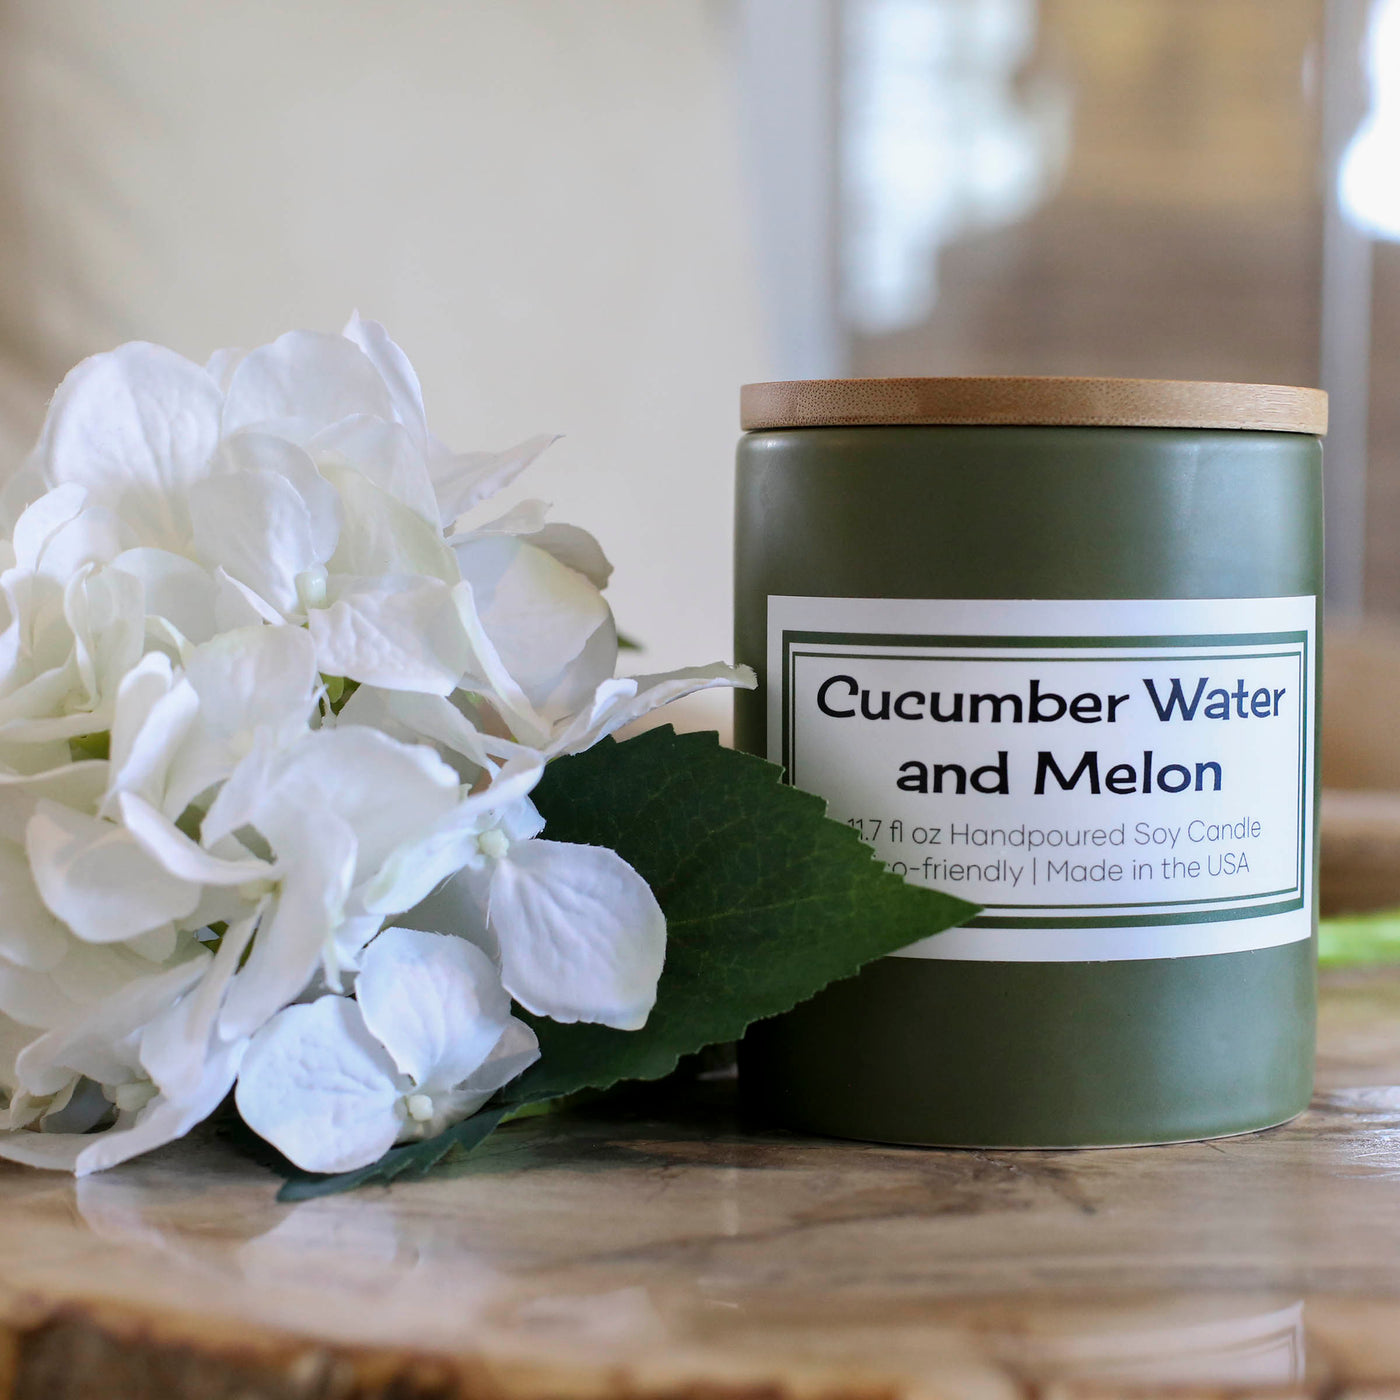 mid century modern spa zen cucumber water and melon all natural hand poured soy candle. Eco-friendly. Made in the USA.